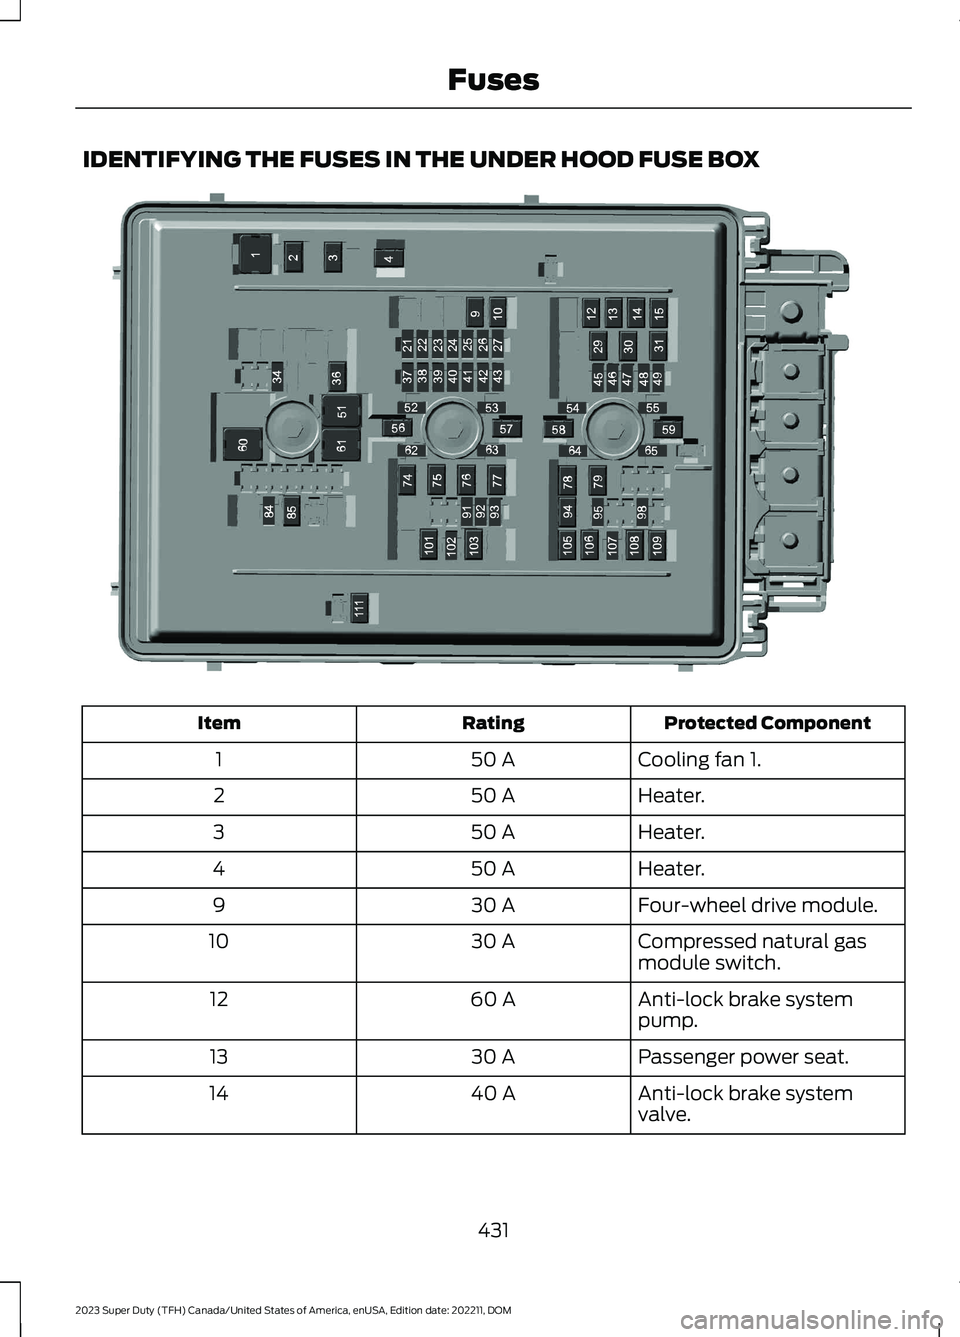 FORD SUPER DUTY 2023  Owners Manual IDENTIFYING THE FUSES IN THE UNDER HOOD FUSE BOX
Protected ComponentRatingItem
Cooling fan 1.50 A1
Heater.50 A2
Heater.50 A3
Heater.50 A4
Four-wheel drive module.30 A9
Compressed natural gasmodule swi